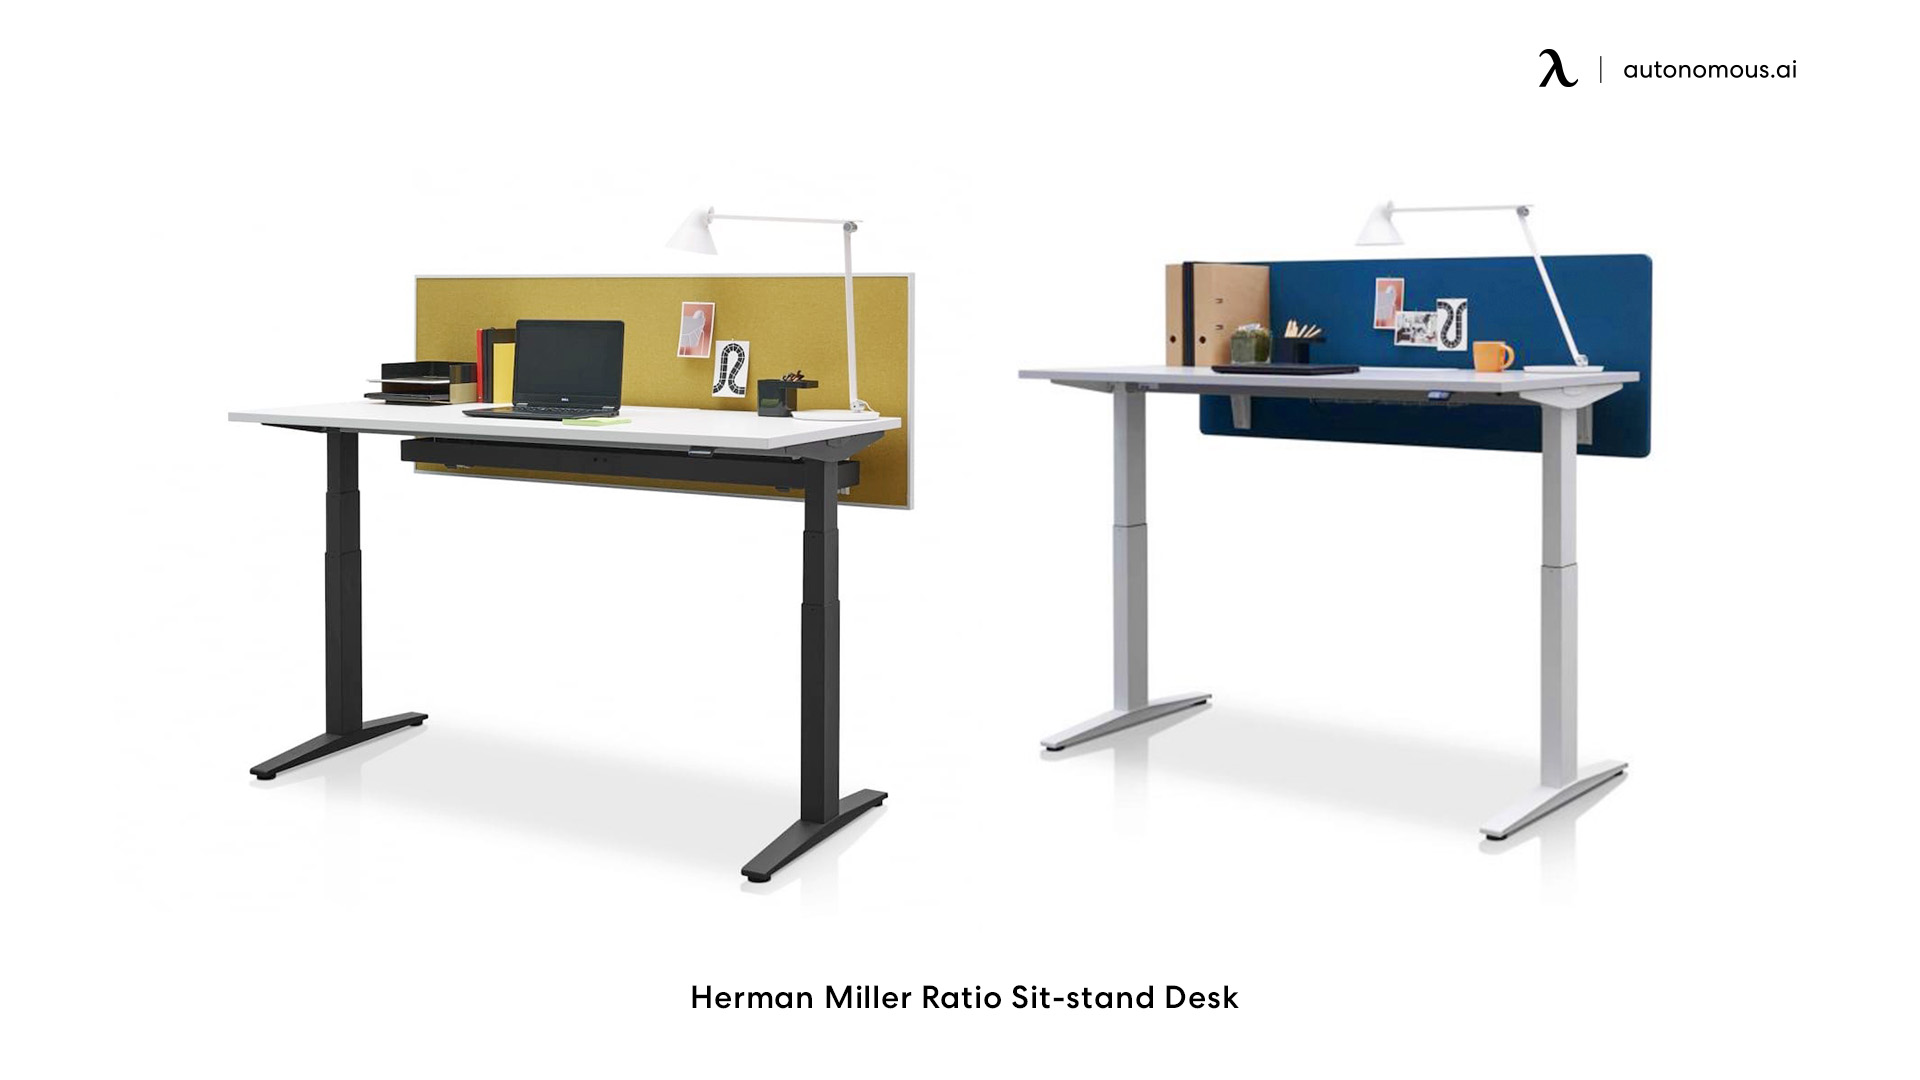 Herman Miller Ratio dual monitor sit stand workstation